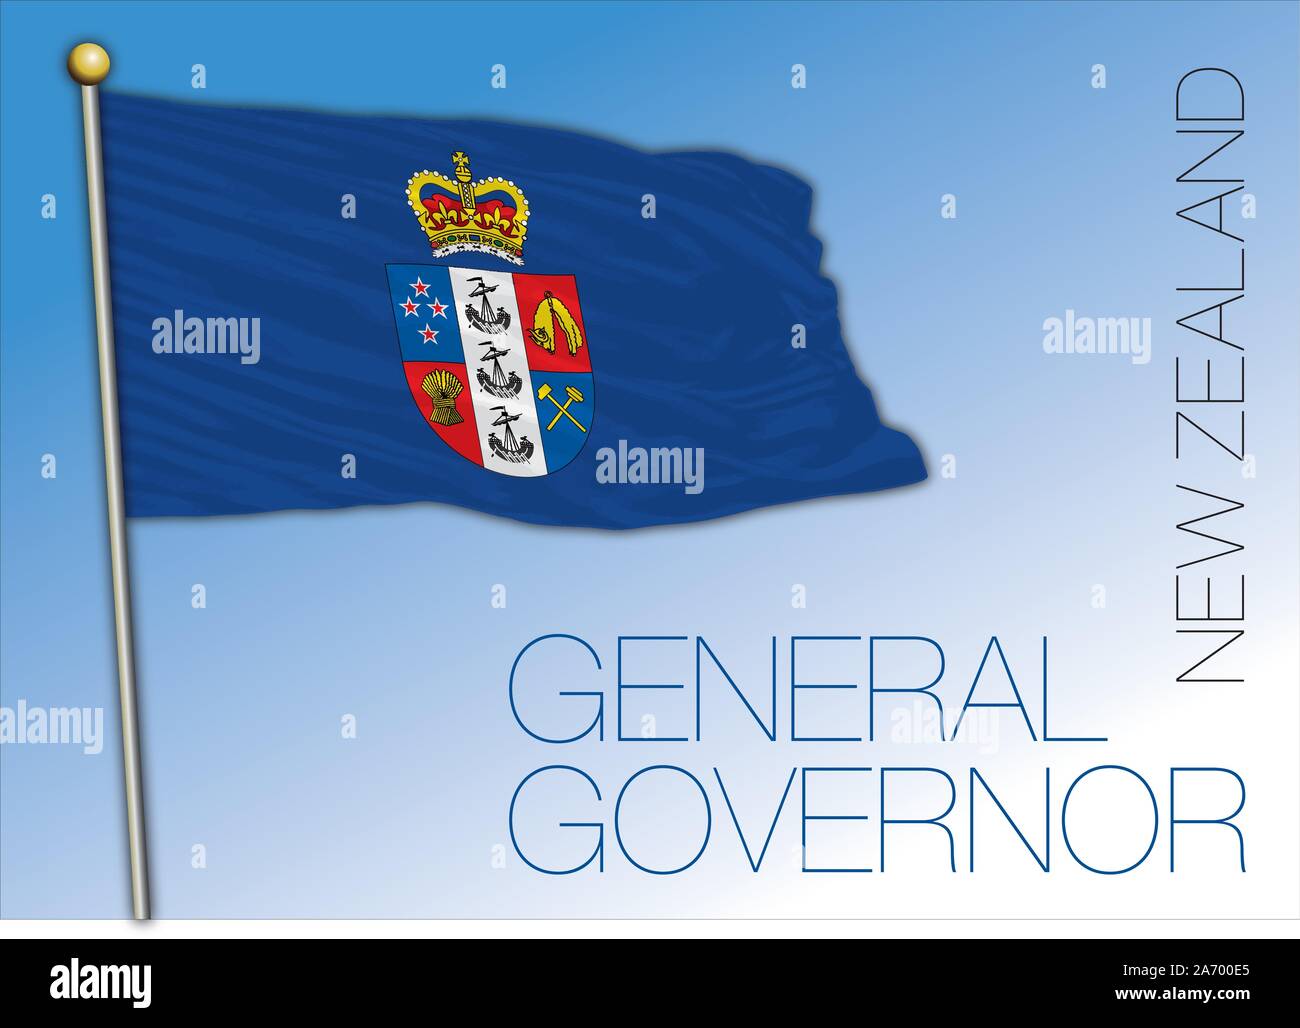 New Zealand official flag of the NZ General Governor, vector illustration Stock Vector